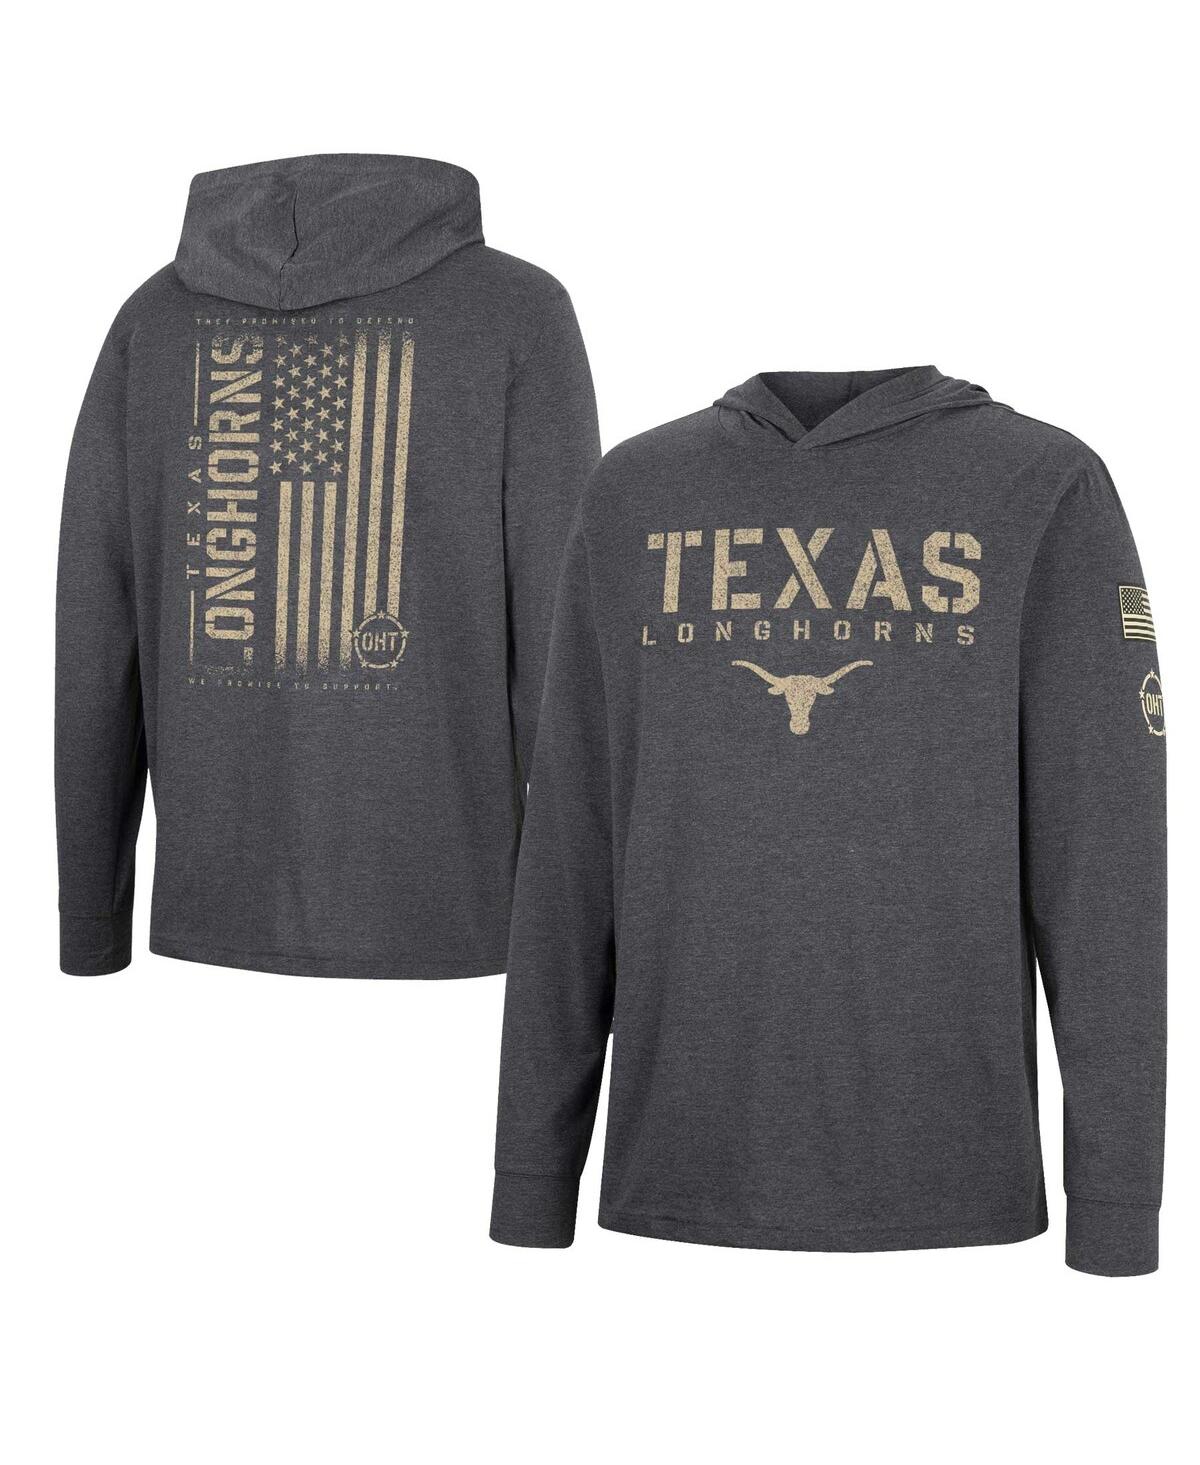 Colosseum Men's  Charcoal Texas Longhorns Team Oht Military-inspired Appreciation Hoodie Long Sleeve